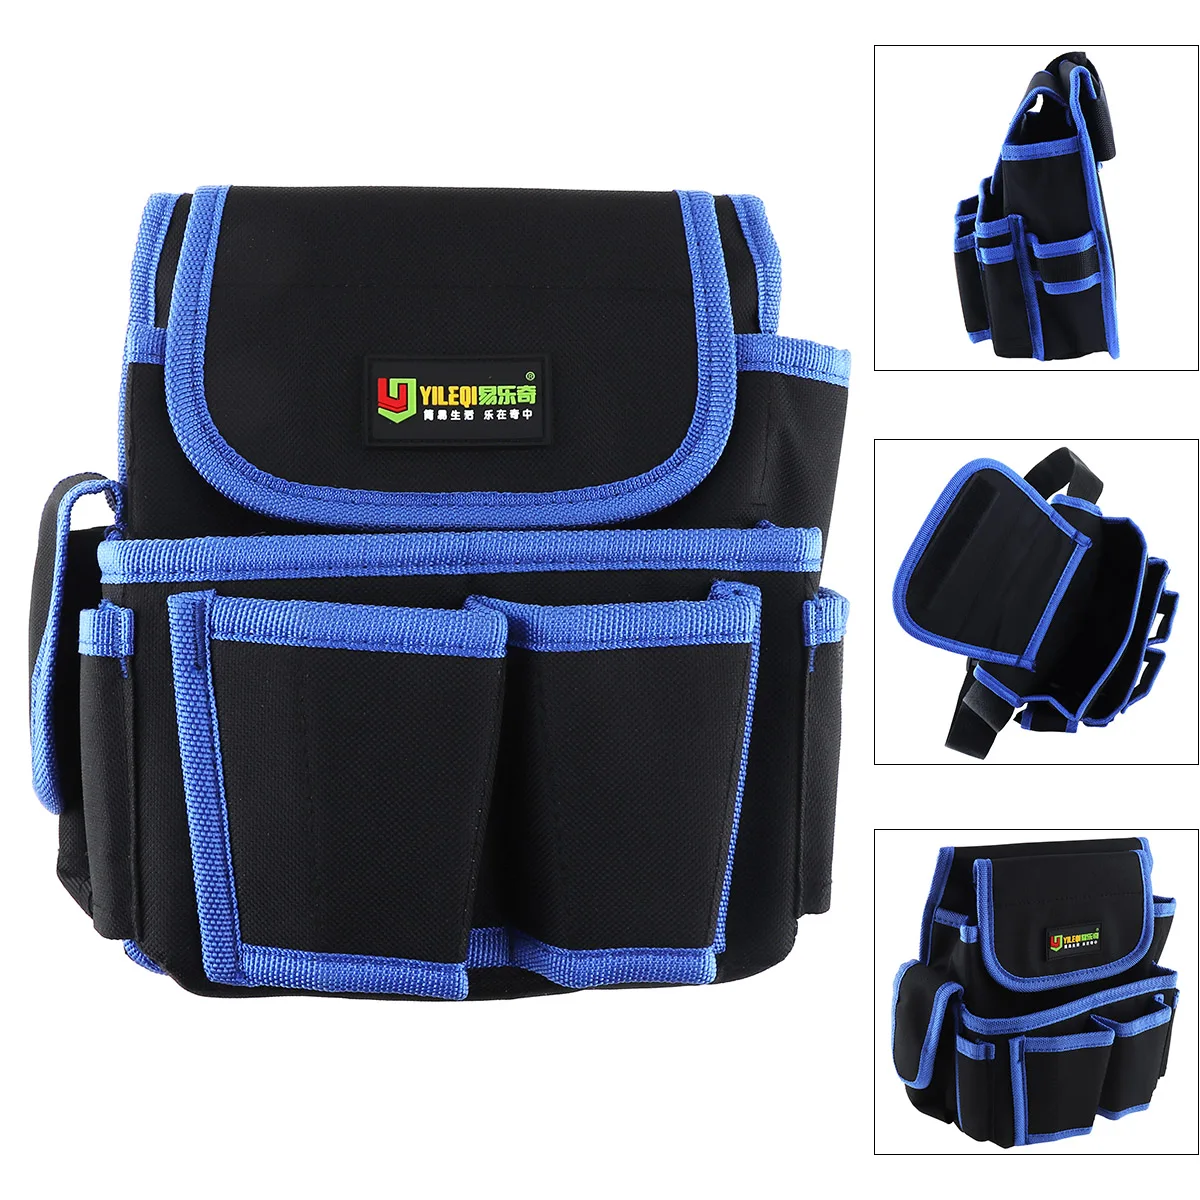 Multifunctional Durable Waterproof Waist Tool Bag with 4 Holes 2 Pocket /Electric Drill Pocket for Home /Industrial Maintenance